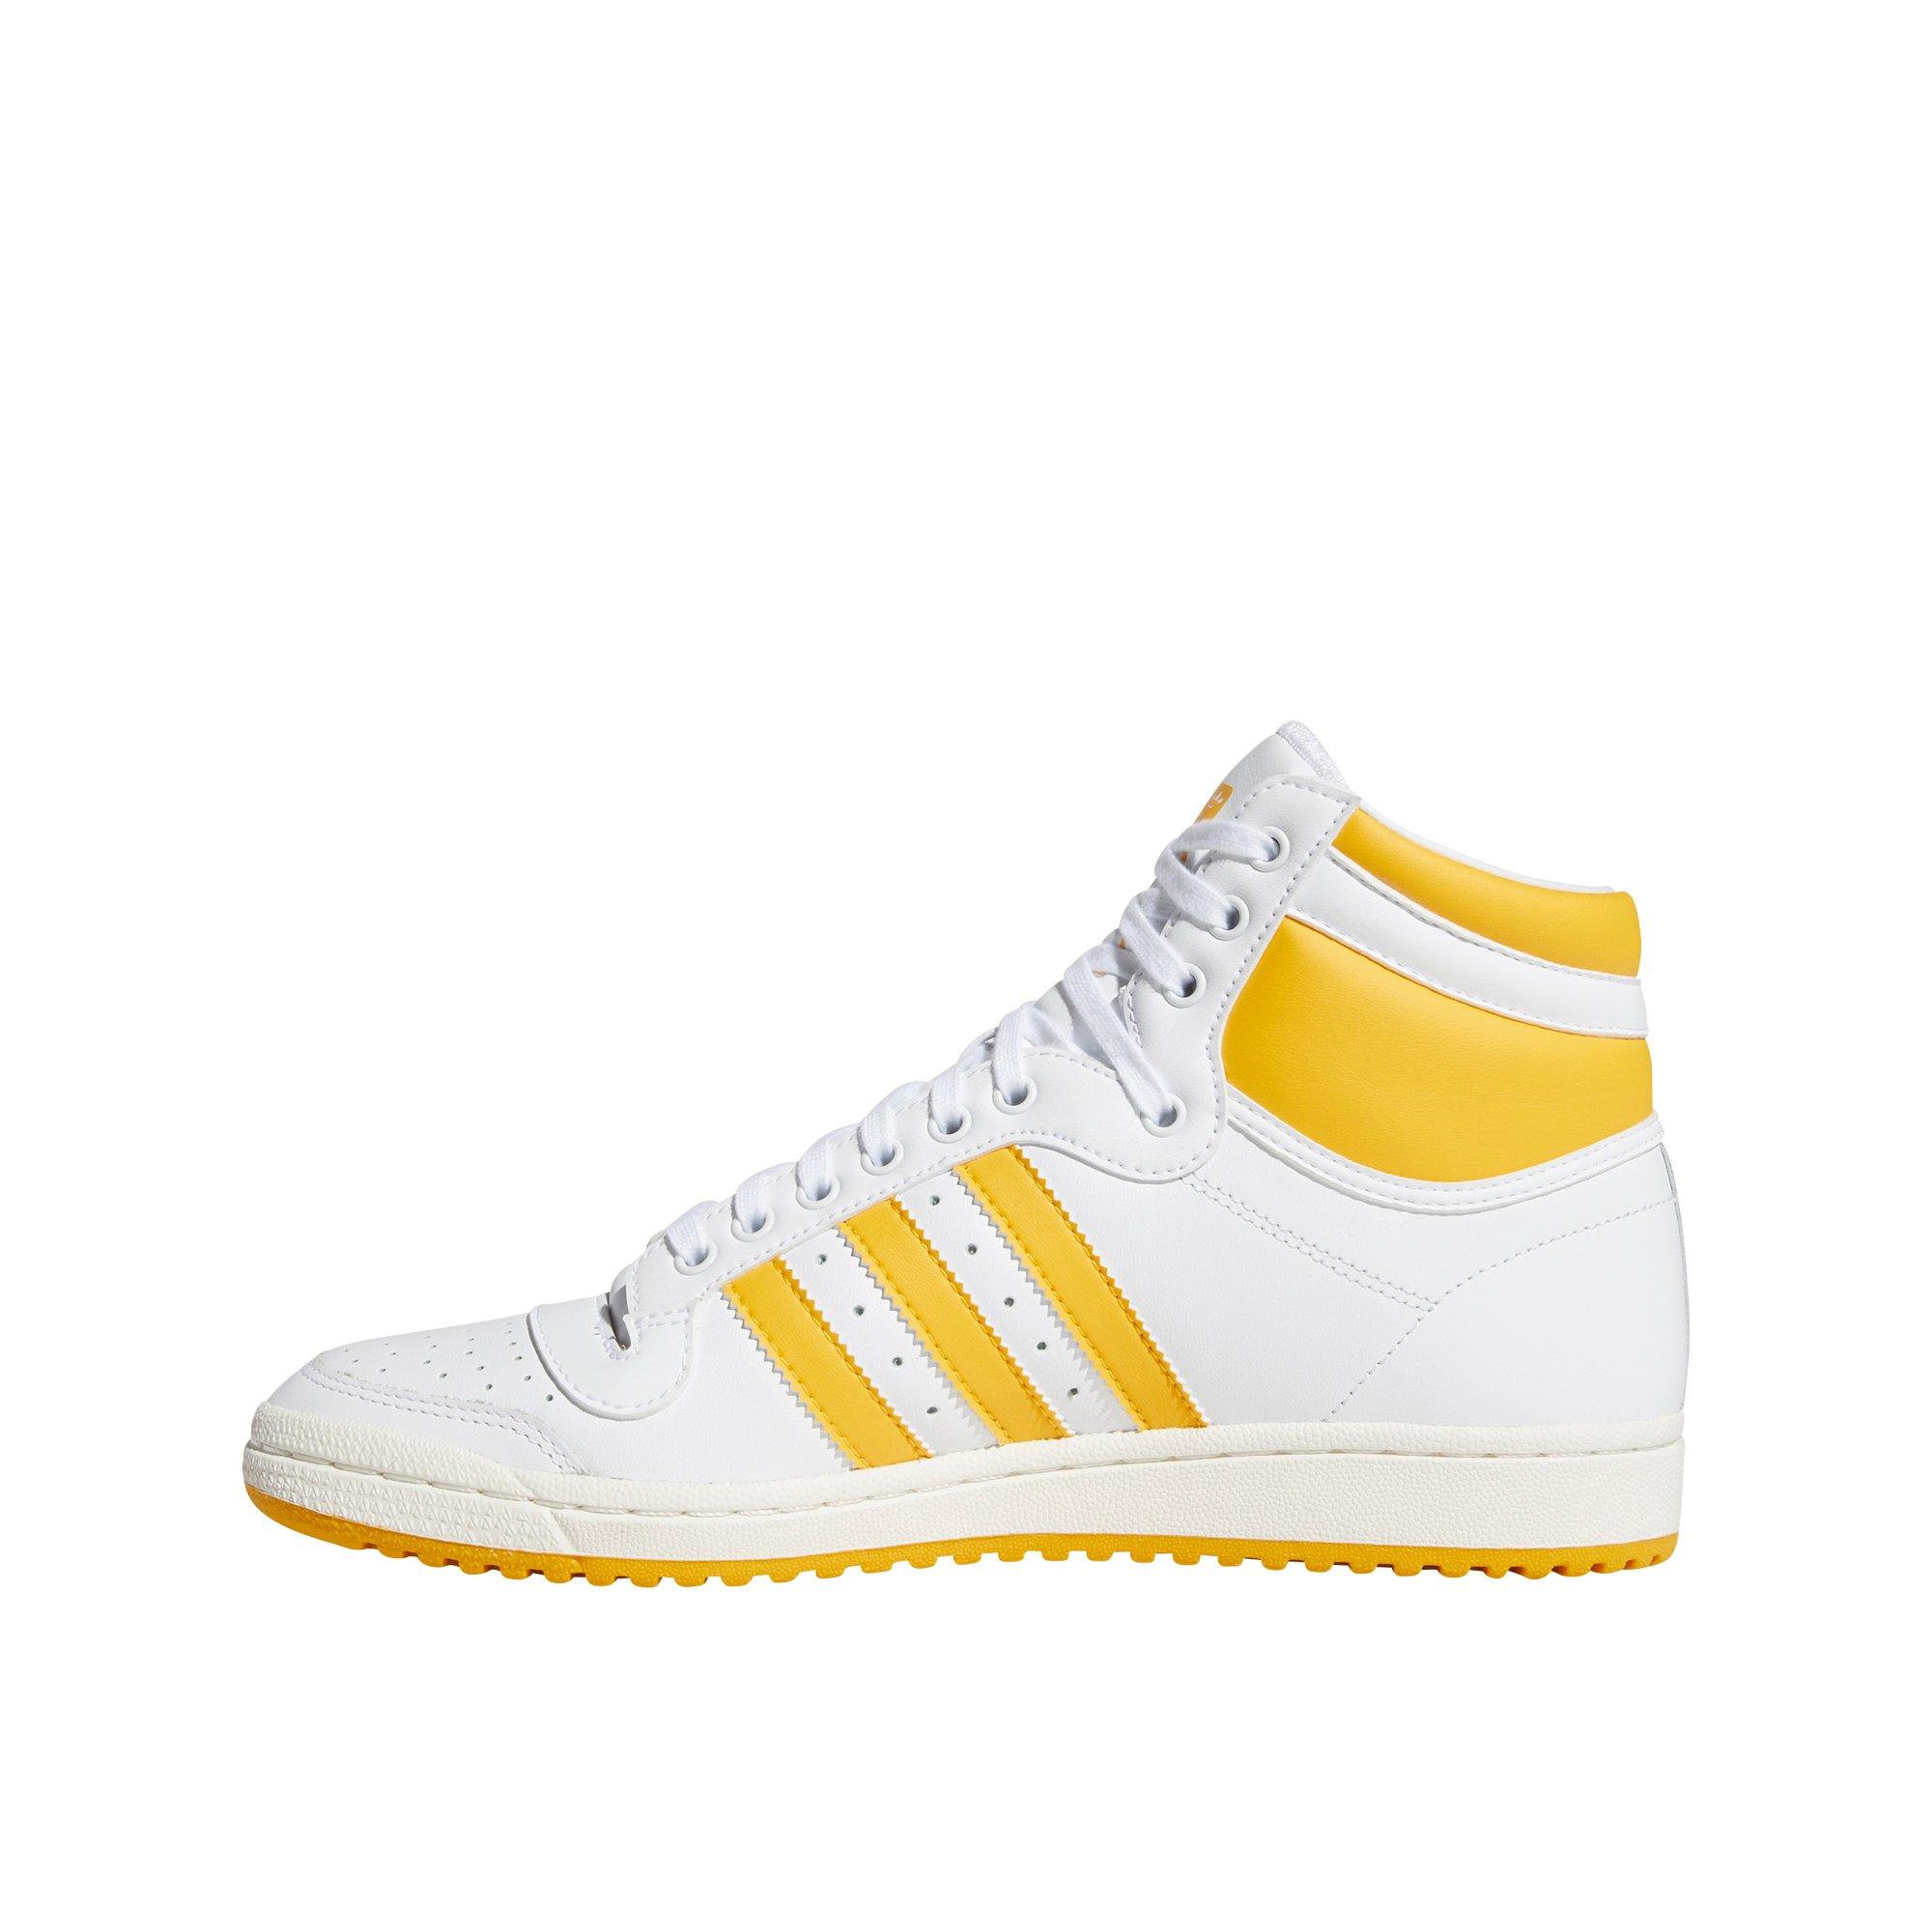 yellow and white adidas top tens